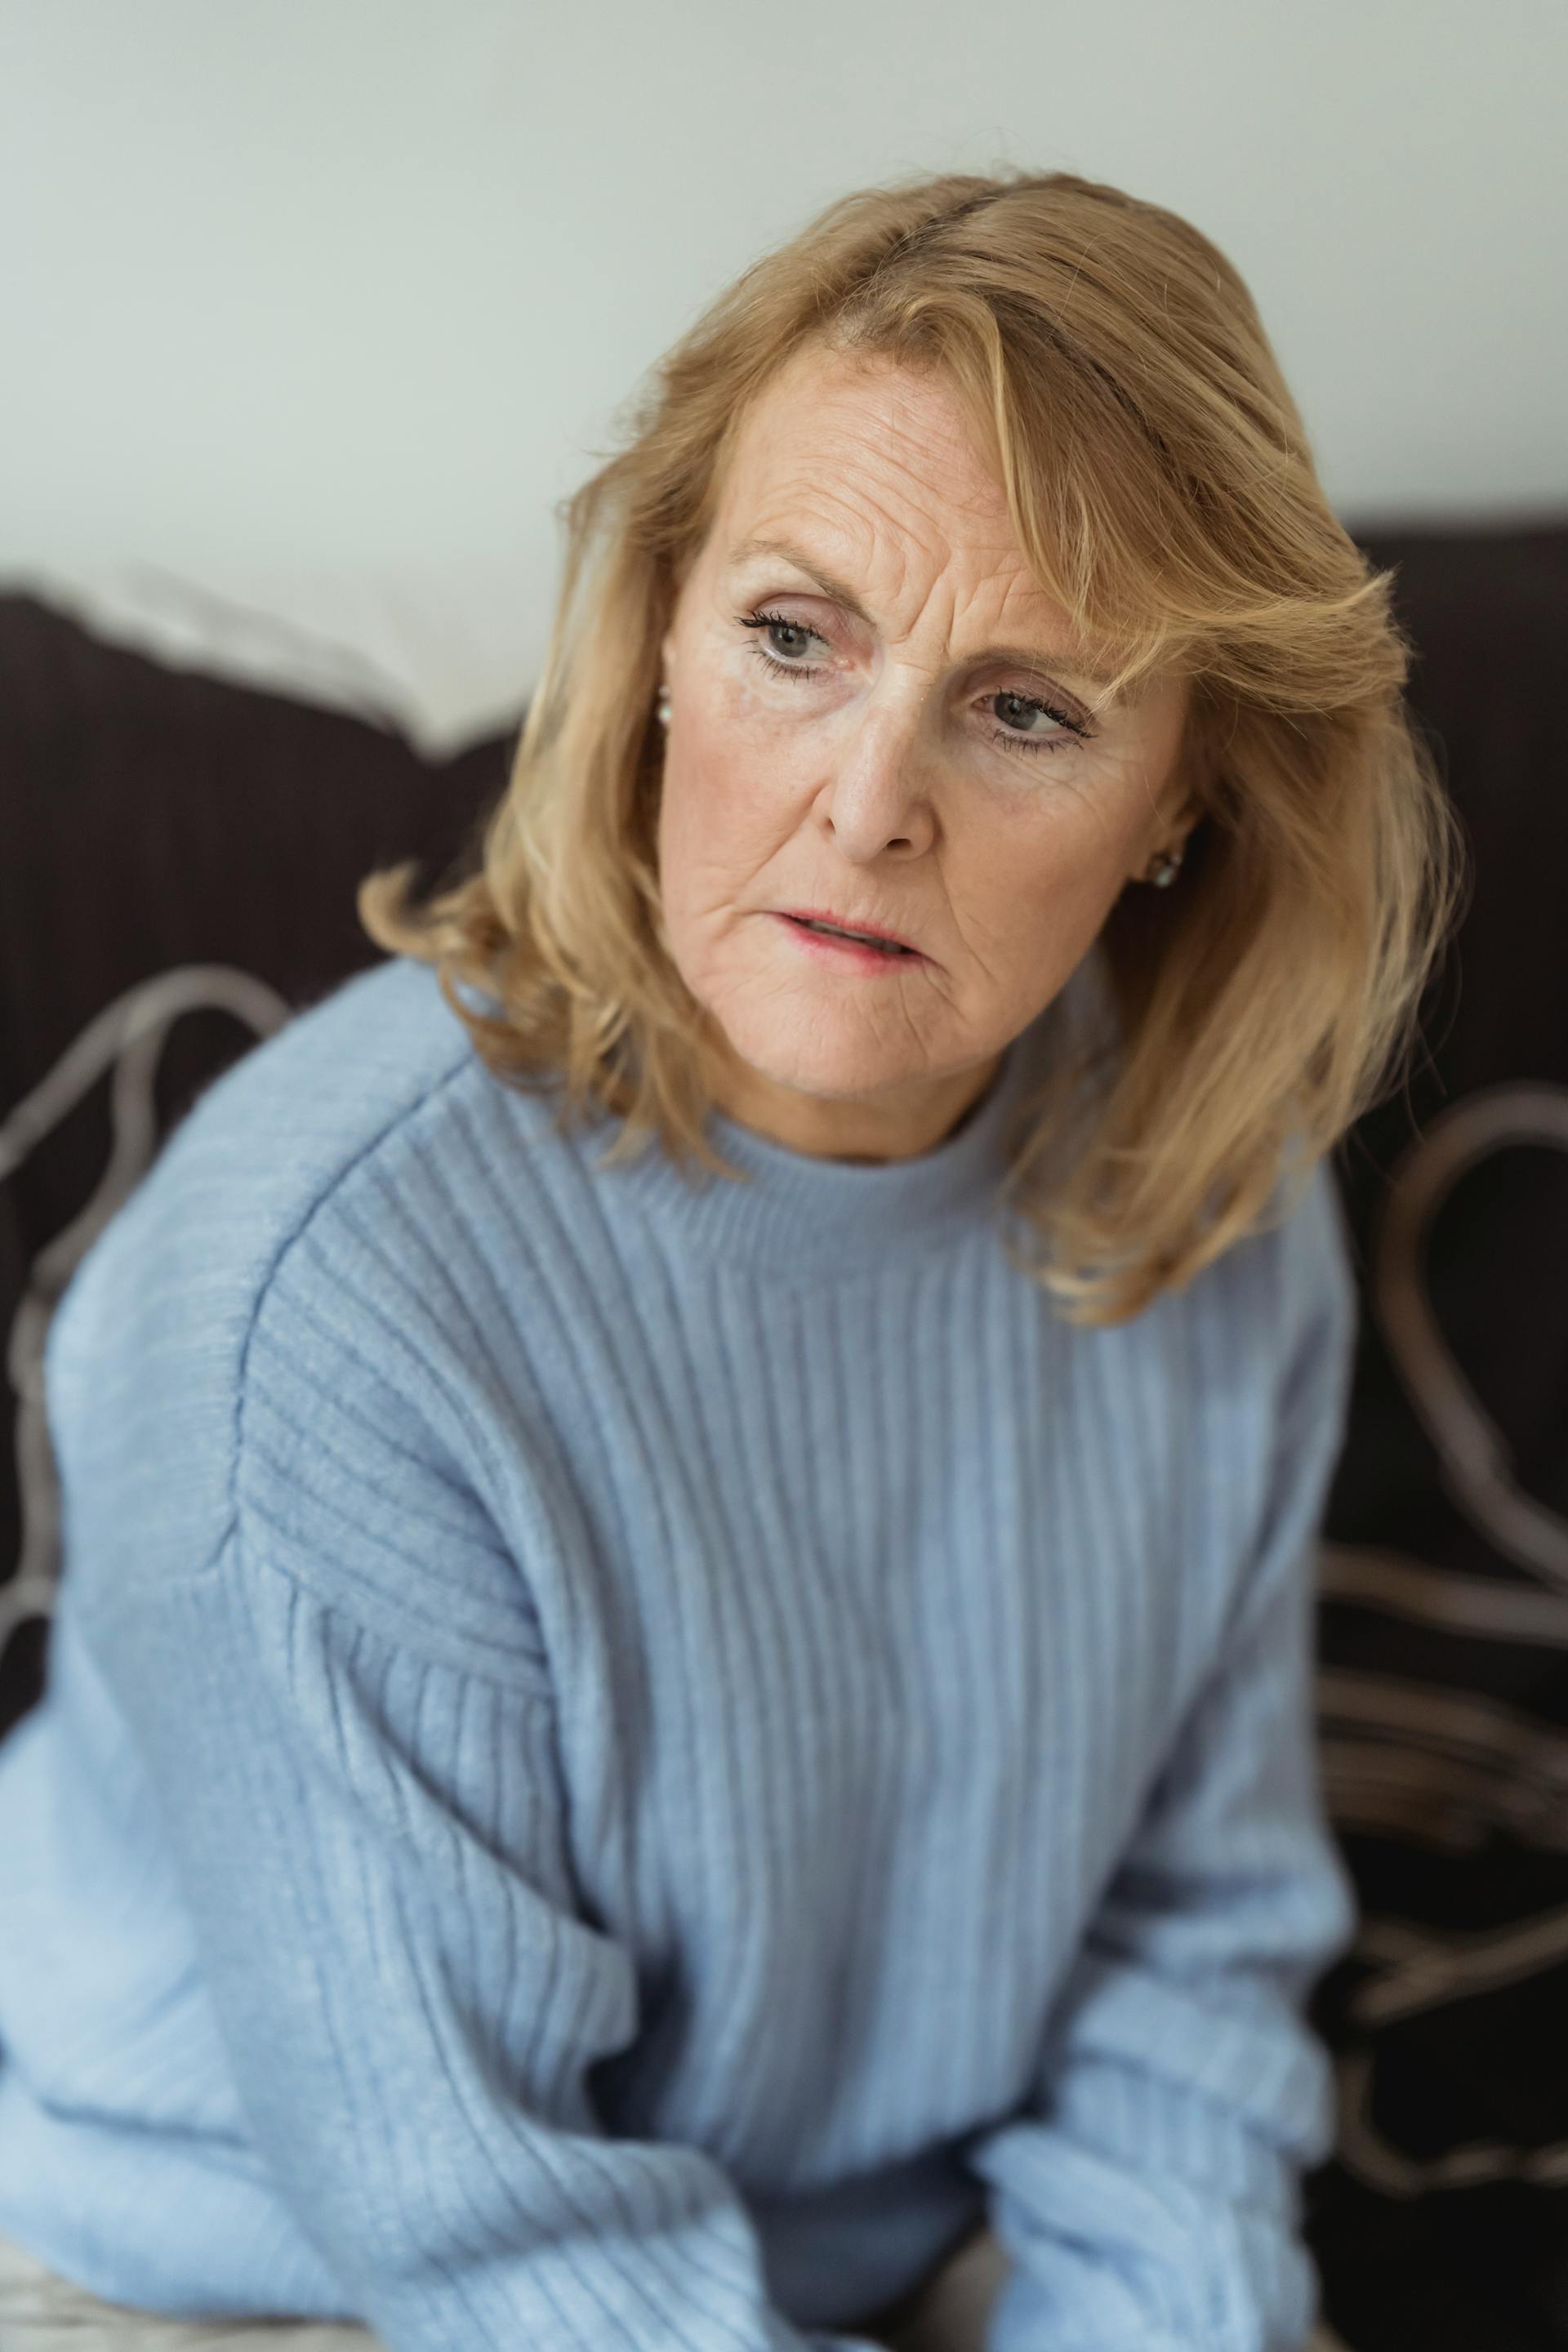 An angry mature woman talking to someone | Source: Pexels